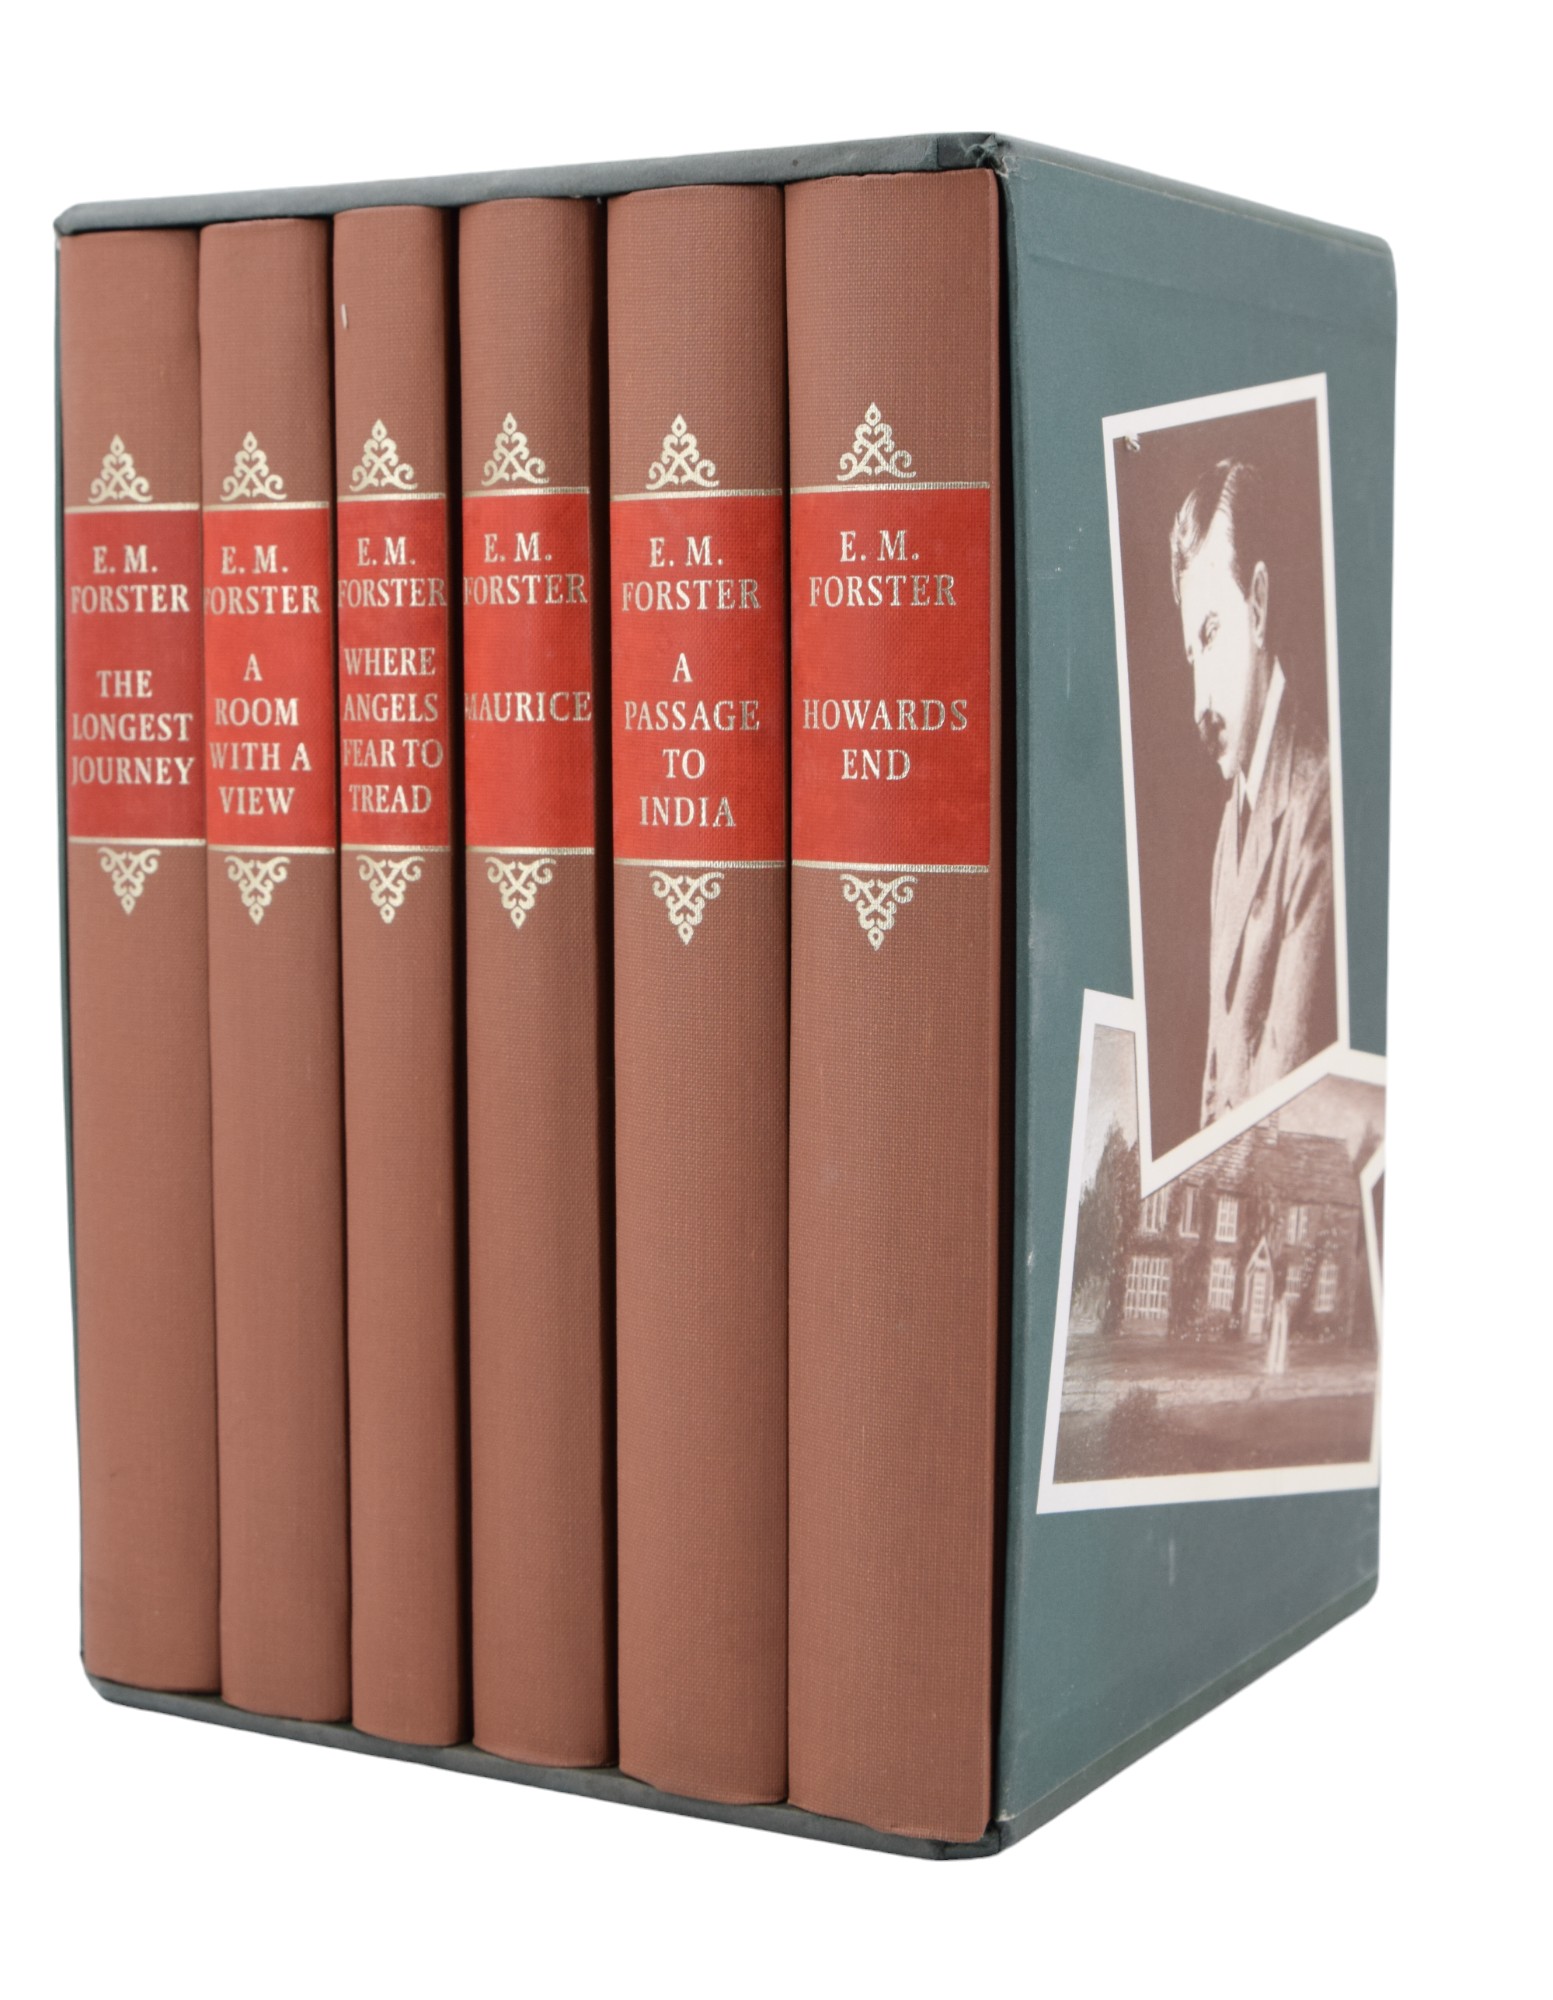 Six Folio Society works of E M Forster: "The Longest Journey", "A Room With A View", "Where Angels